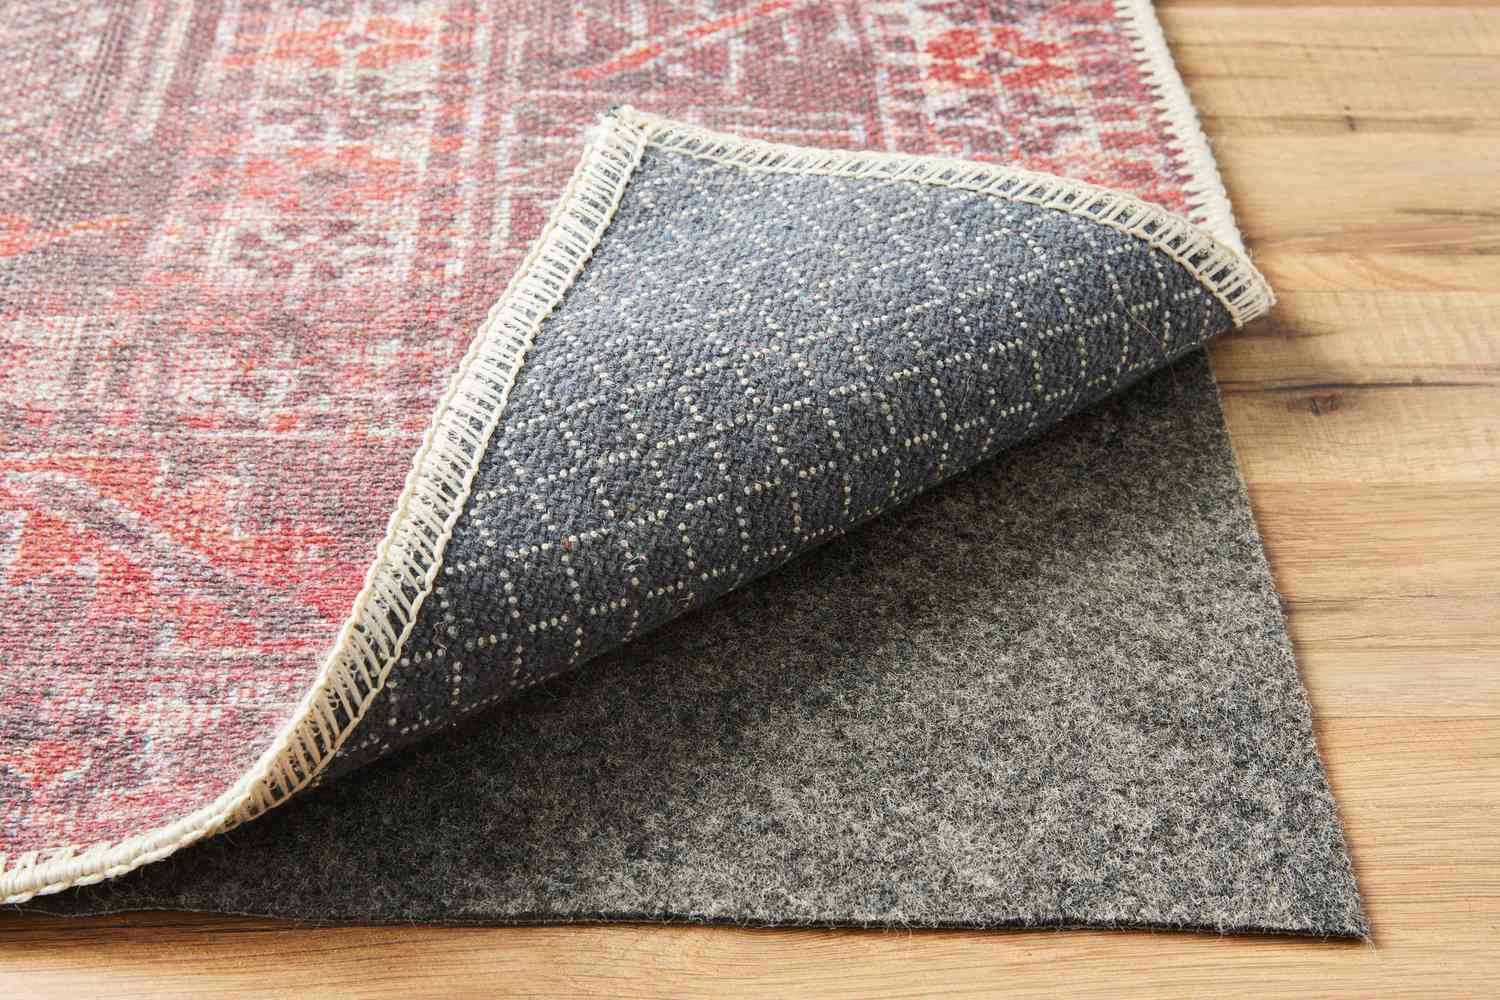 how To Keep a Rug In Place